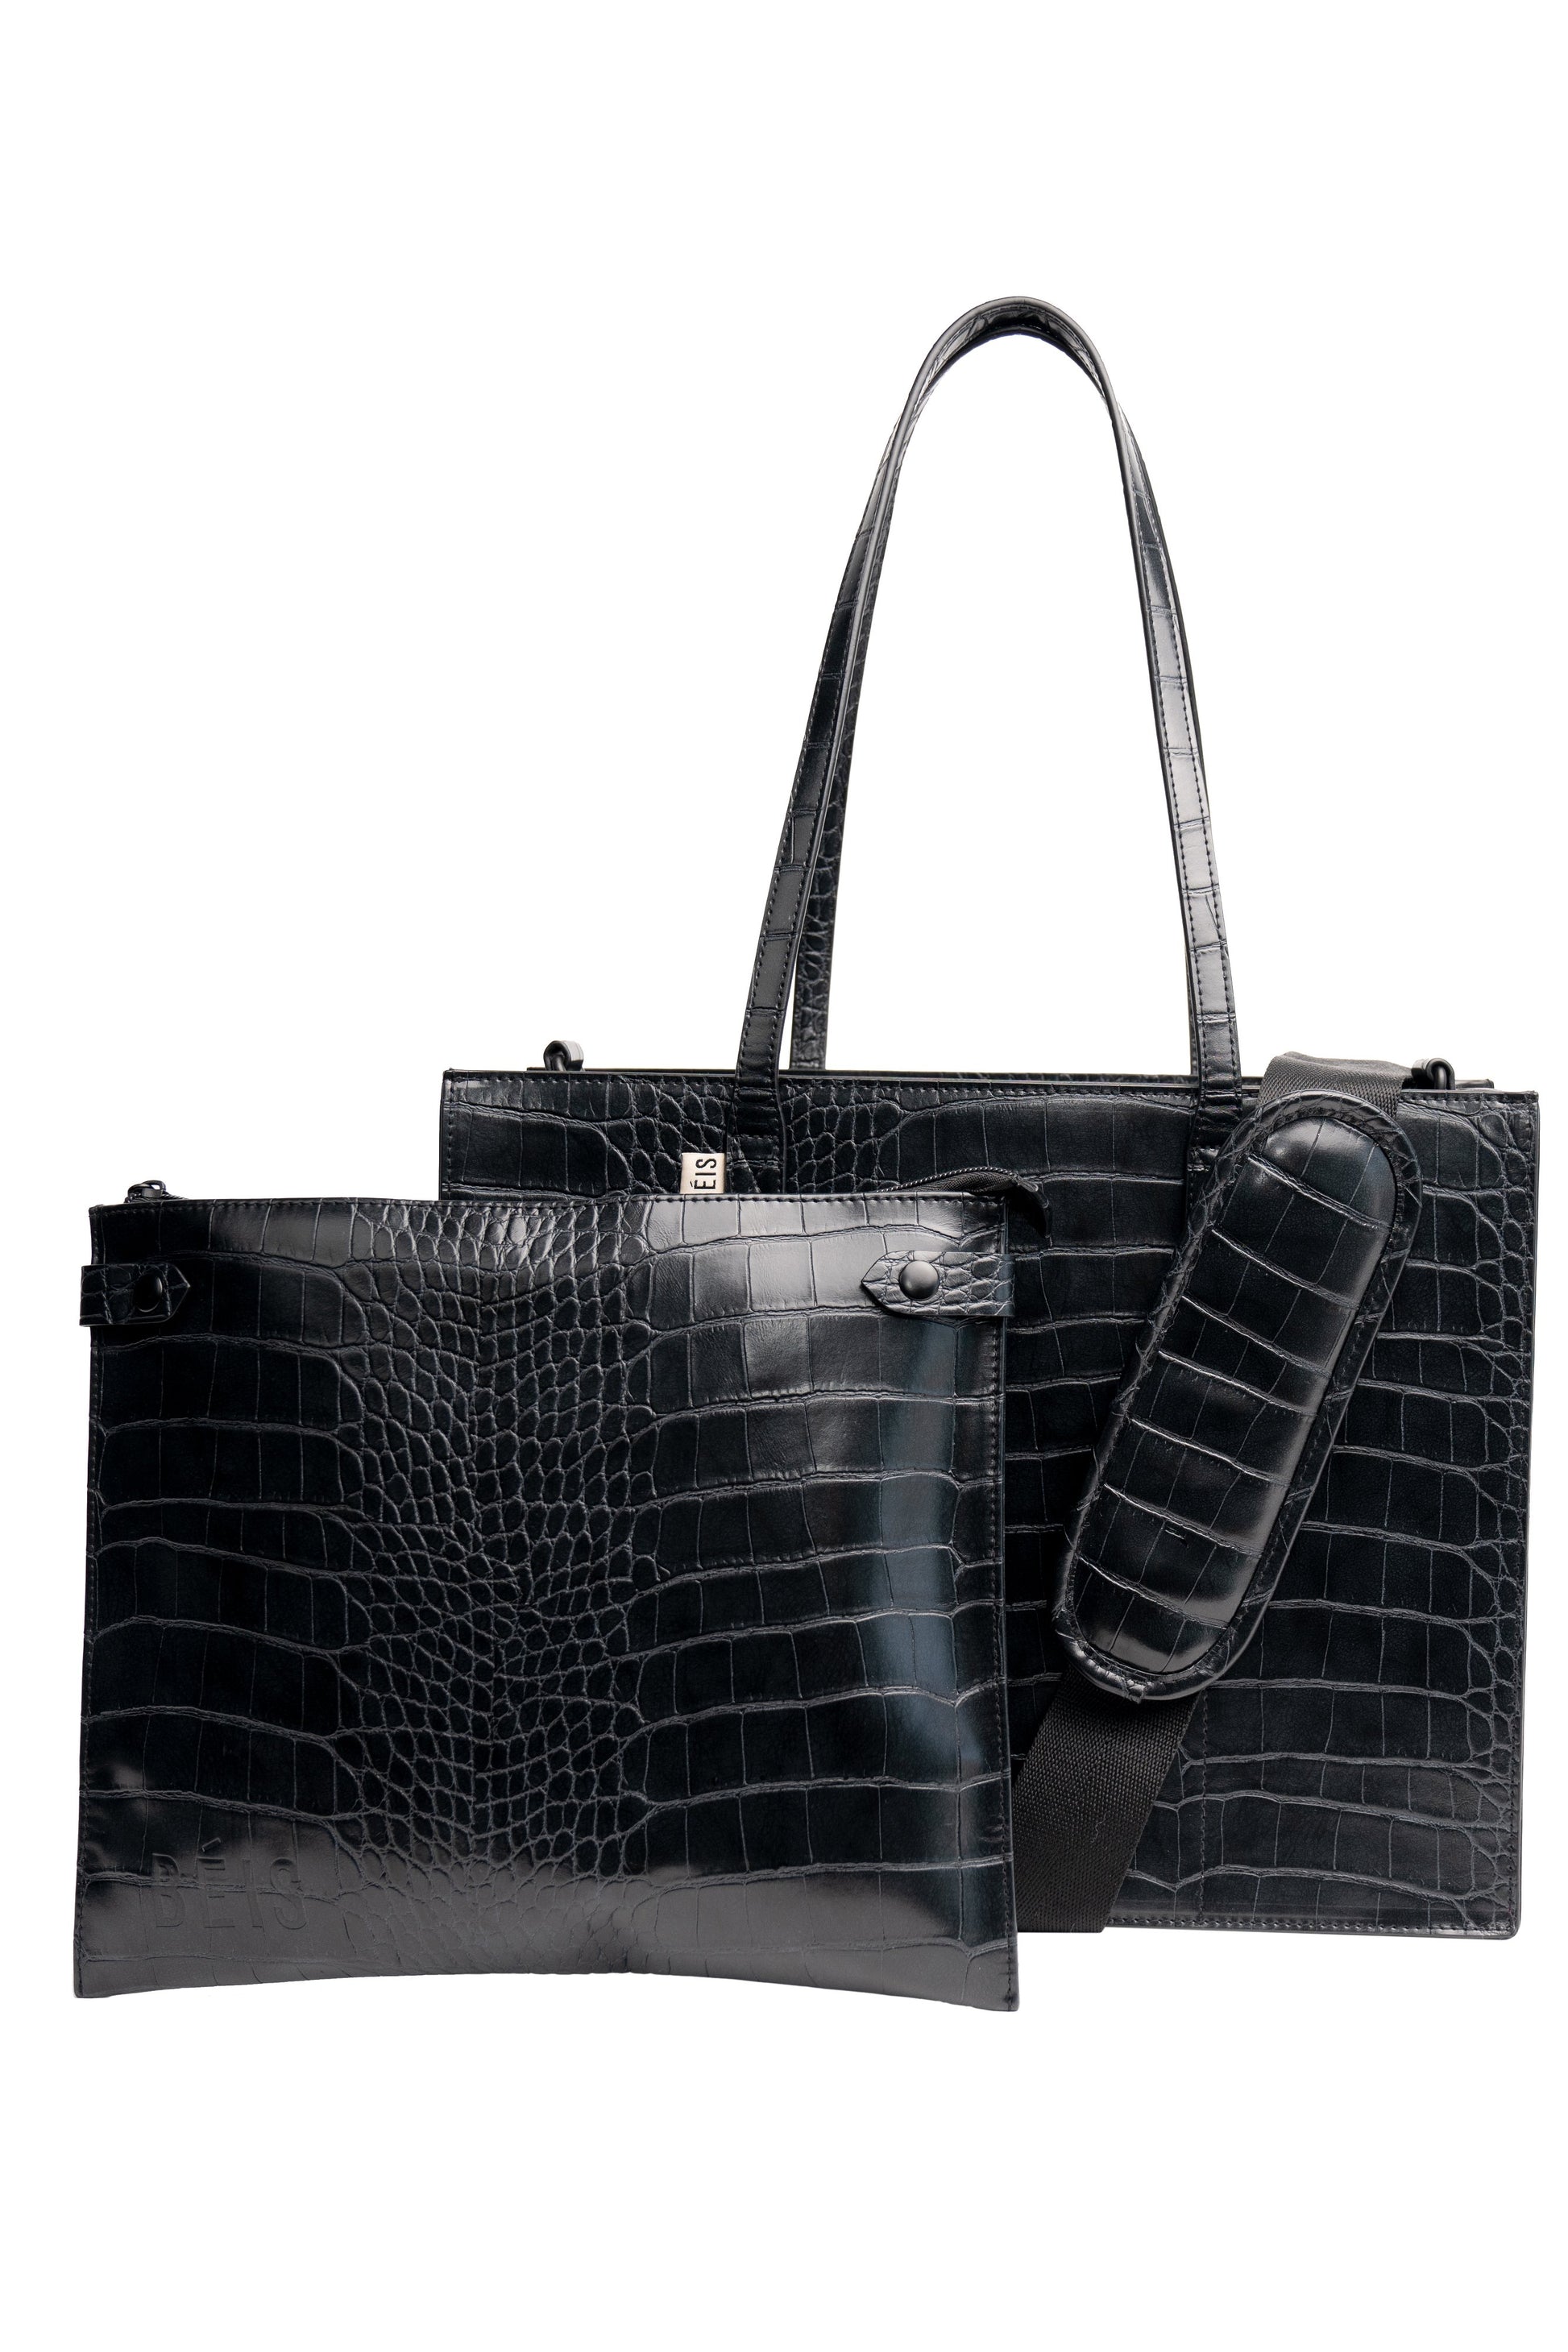 Mini Work Tote in Black Croc Front with Removable Pouch